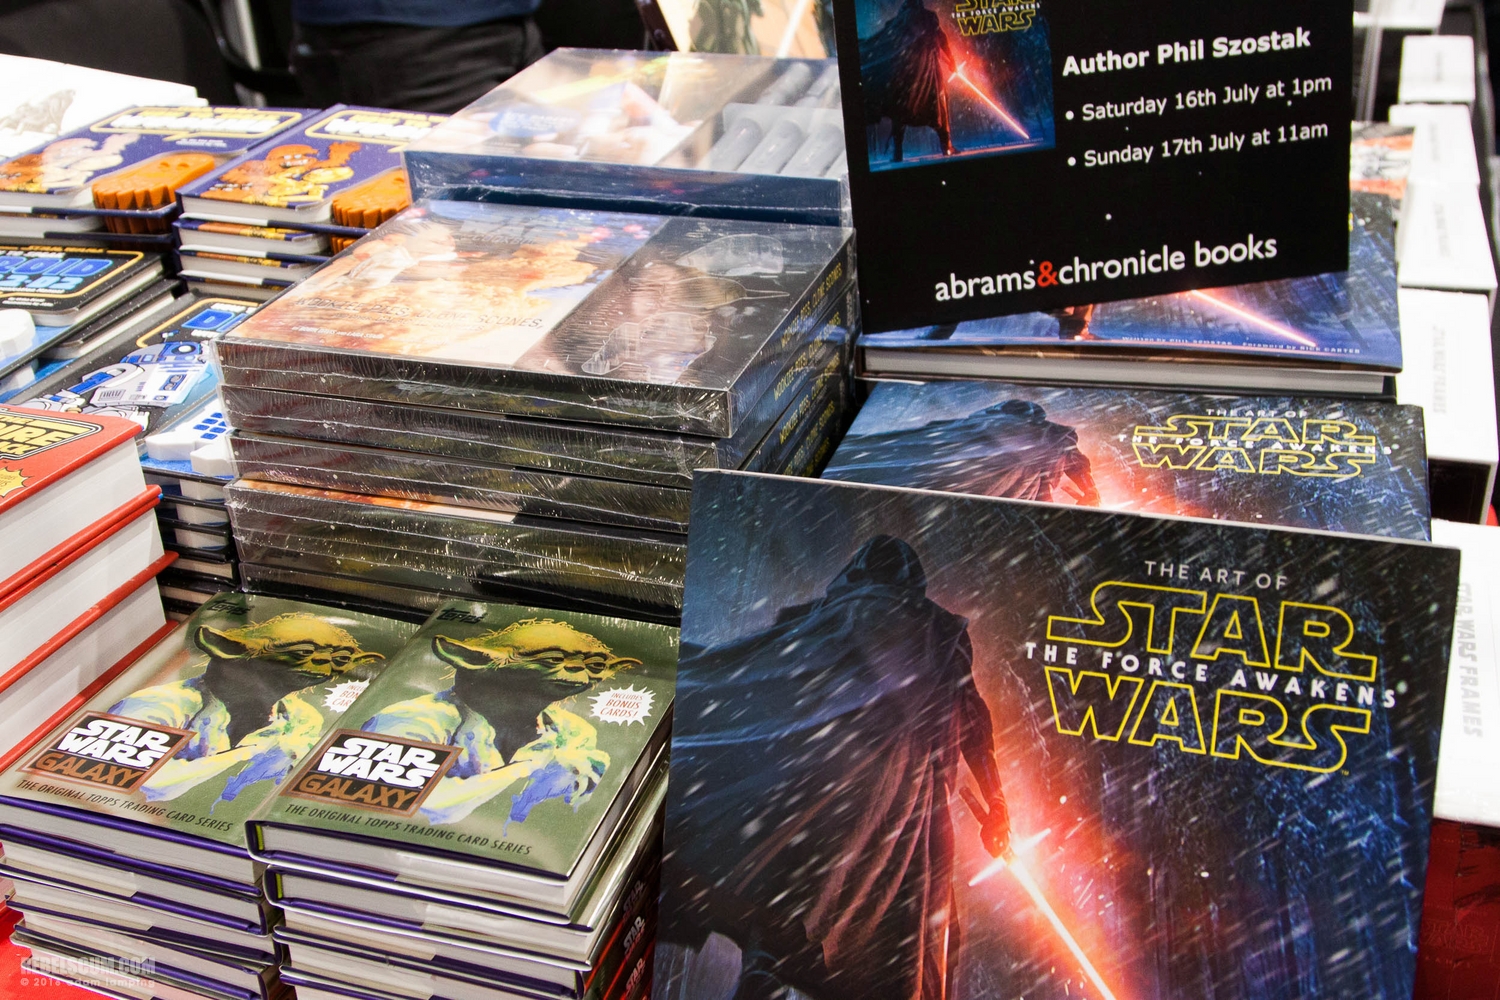 star-wars-celebration-2016-abrams-and-chronicle-books-booth-006.jpg